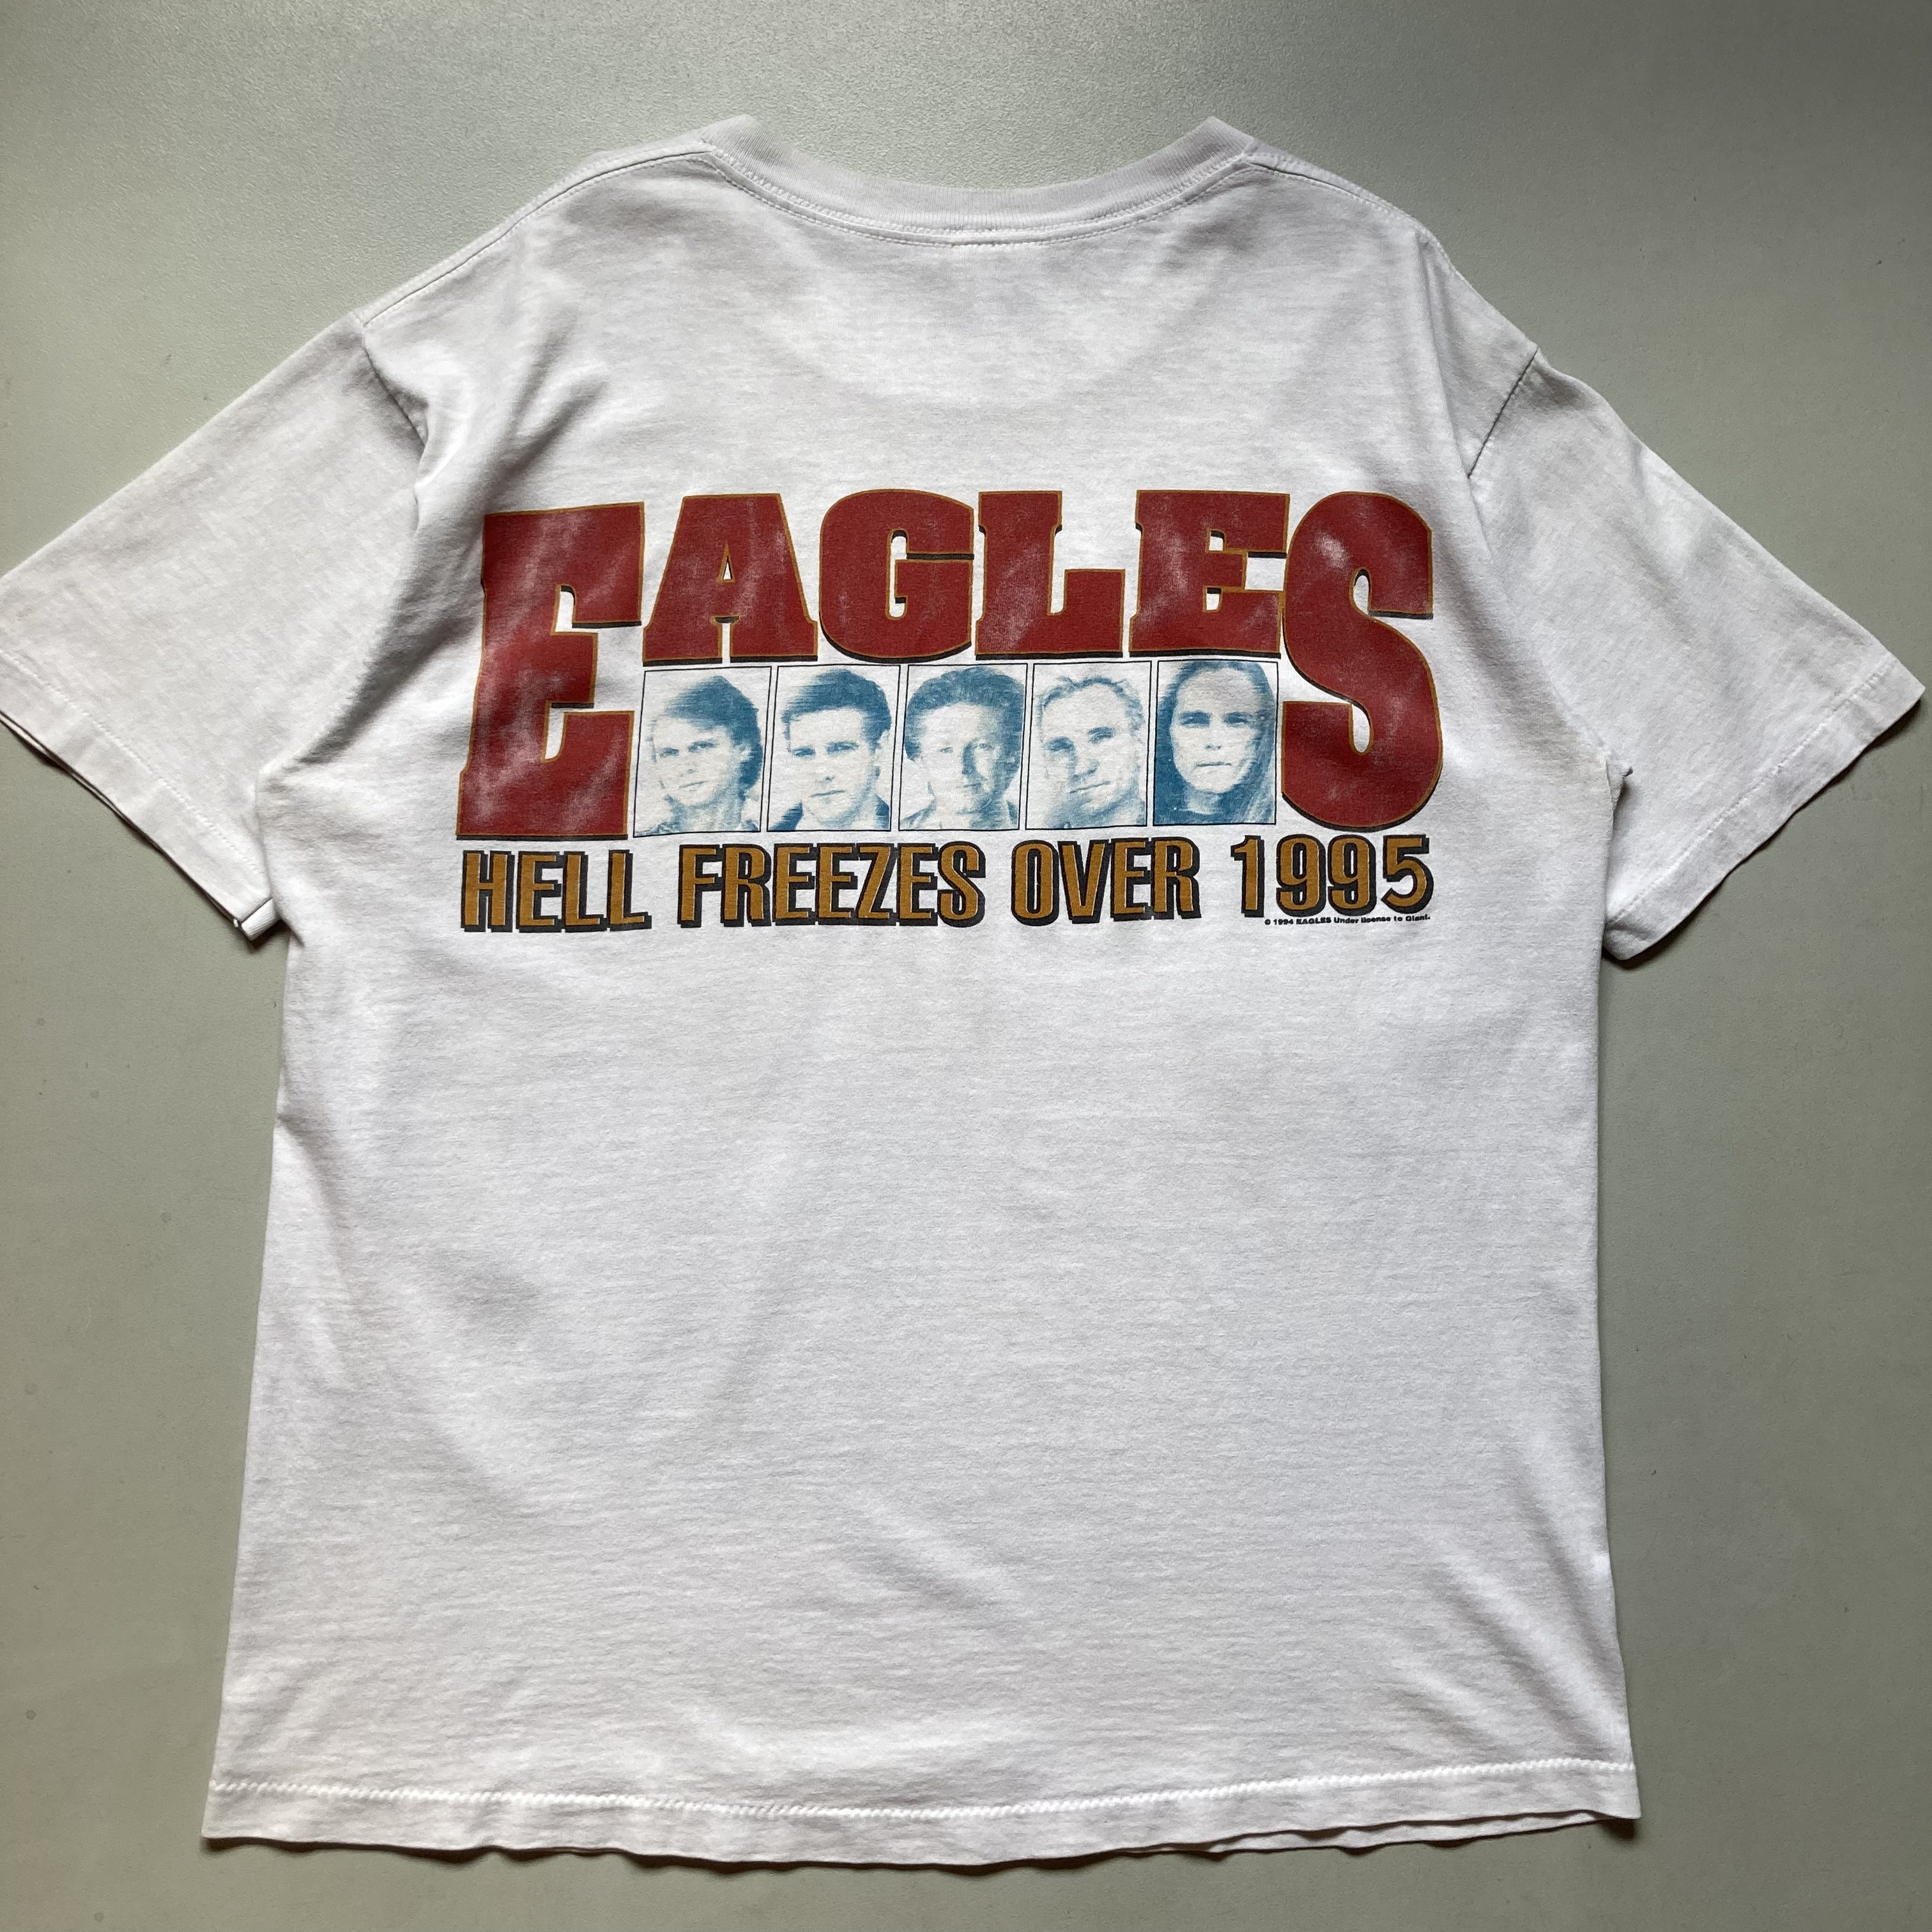 90s eagles band T-shirt 「Hotel California 」 「Hell freeze over